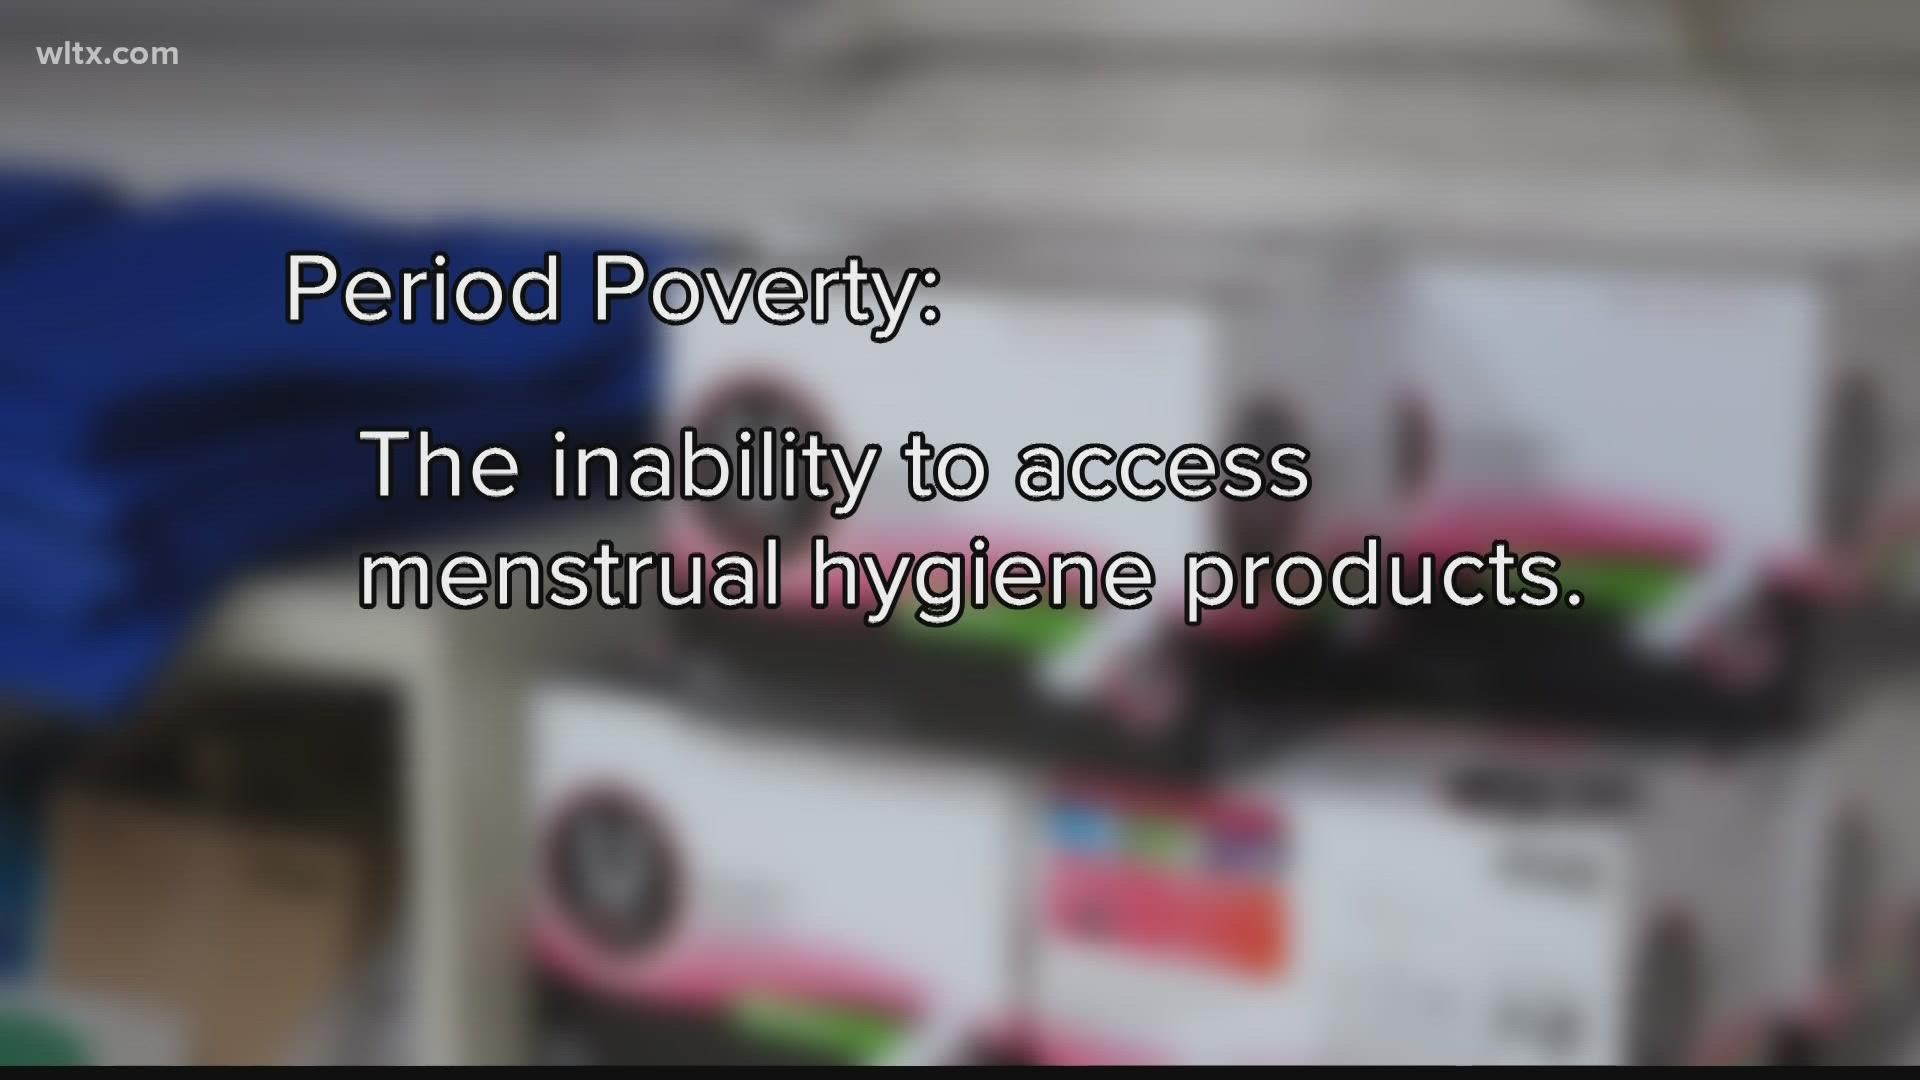 Period Poverty impacts thousands of South Carolinian women.